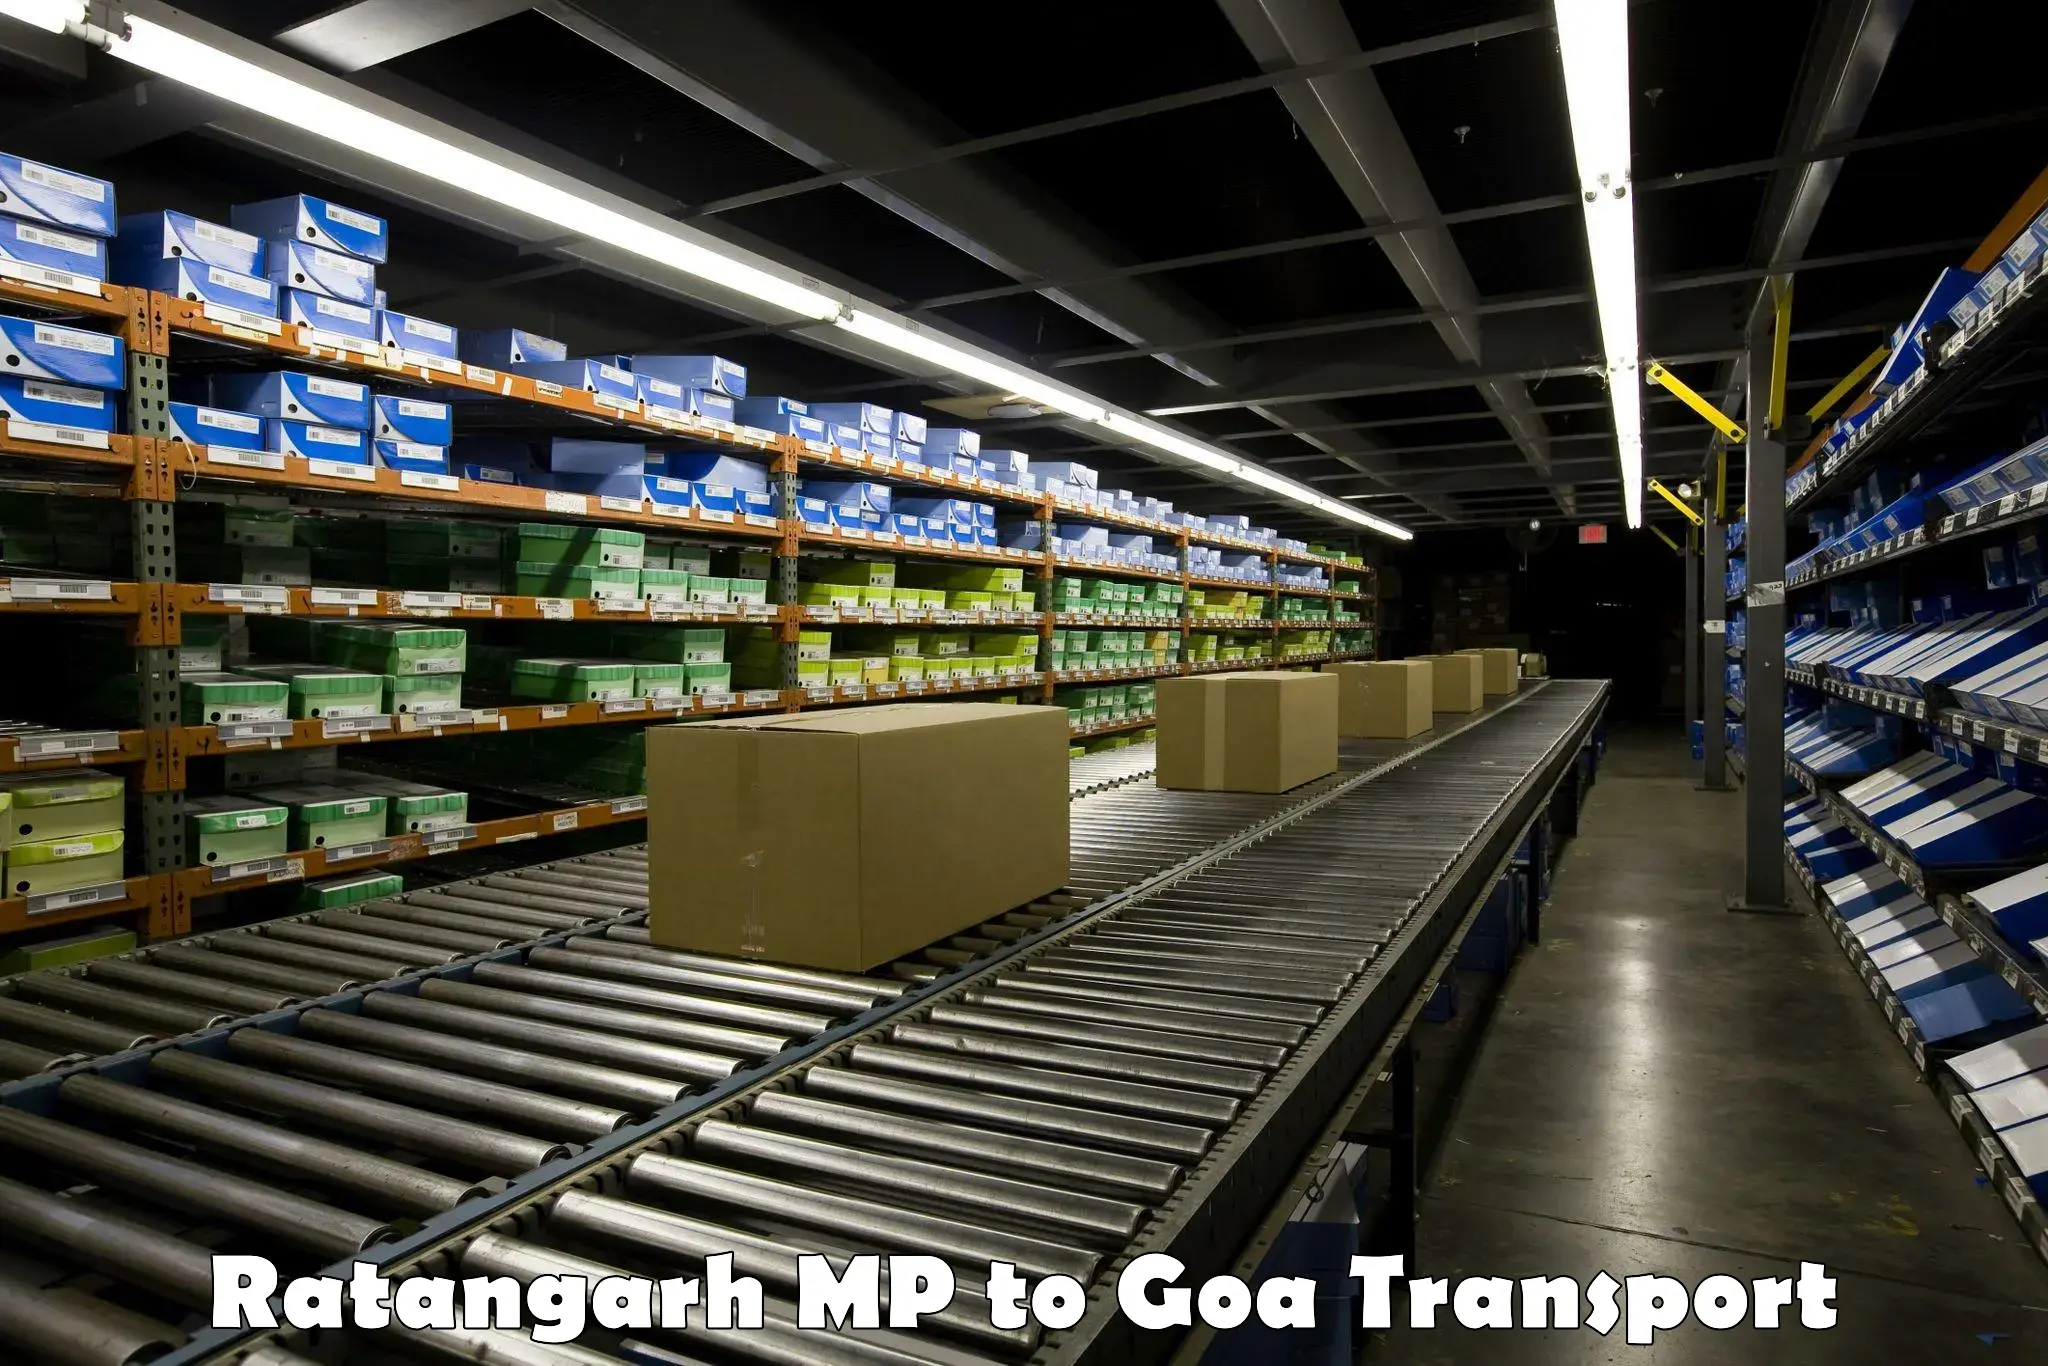 Container transport service Ratangarh MP to Goa